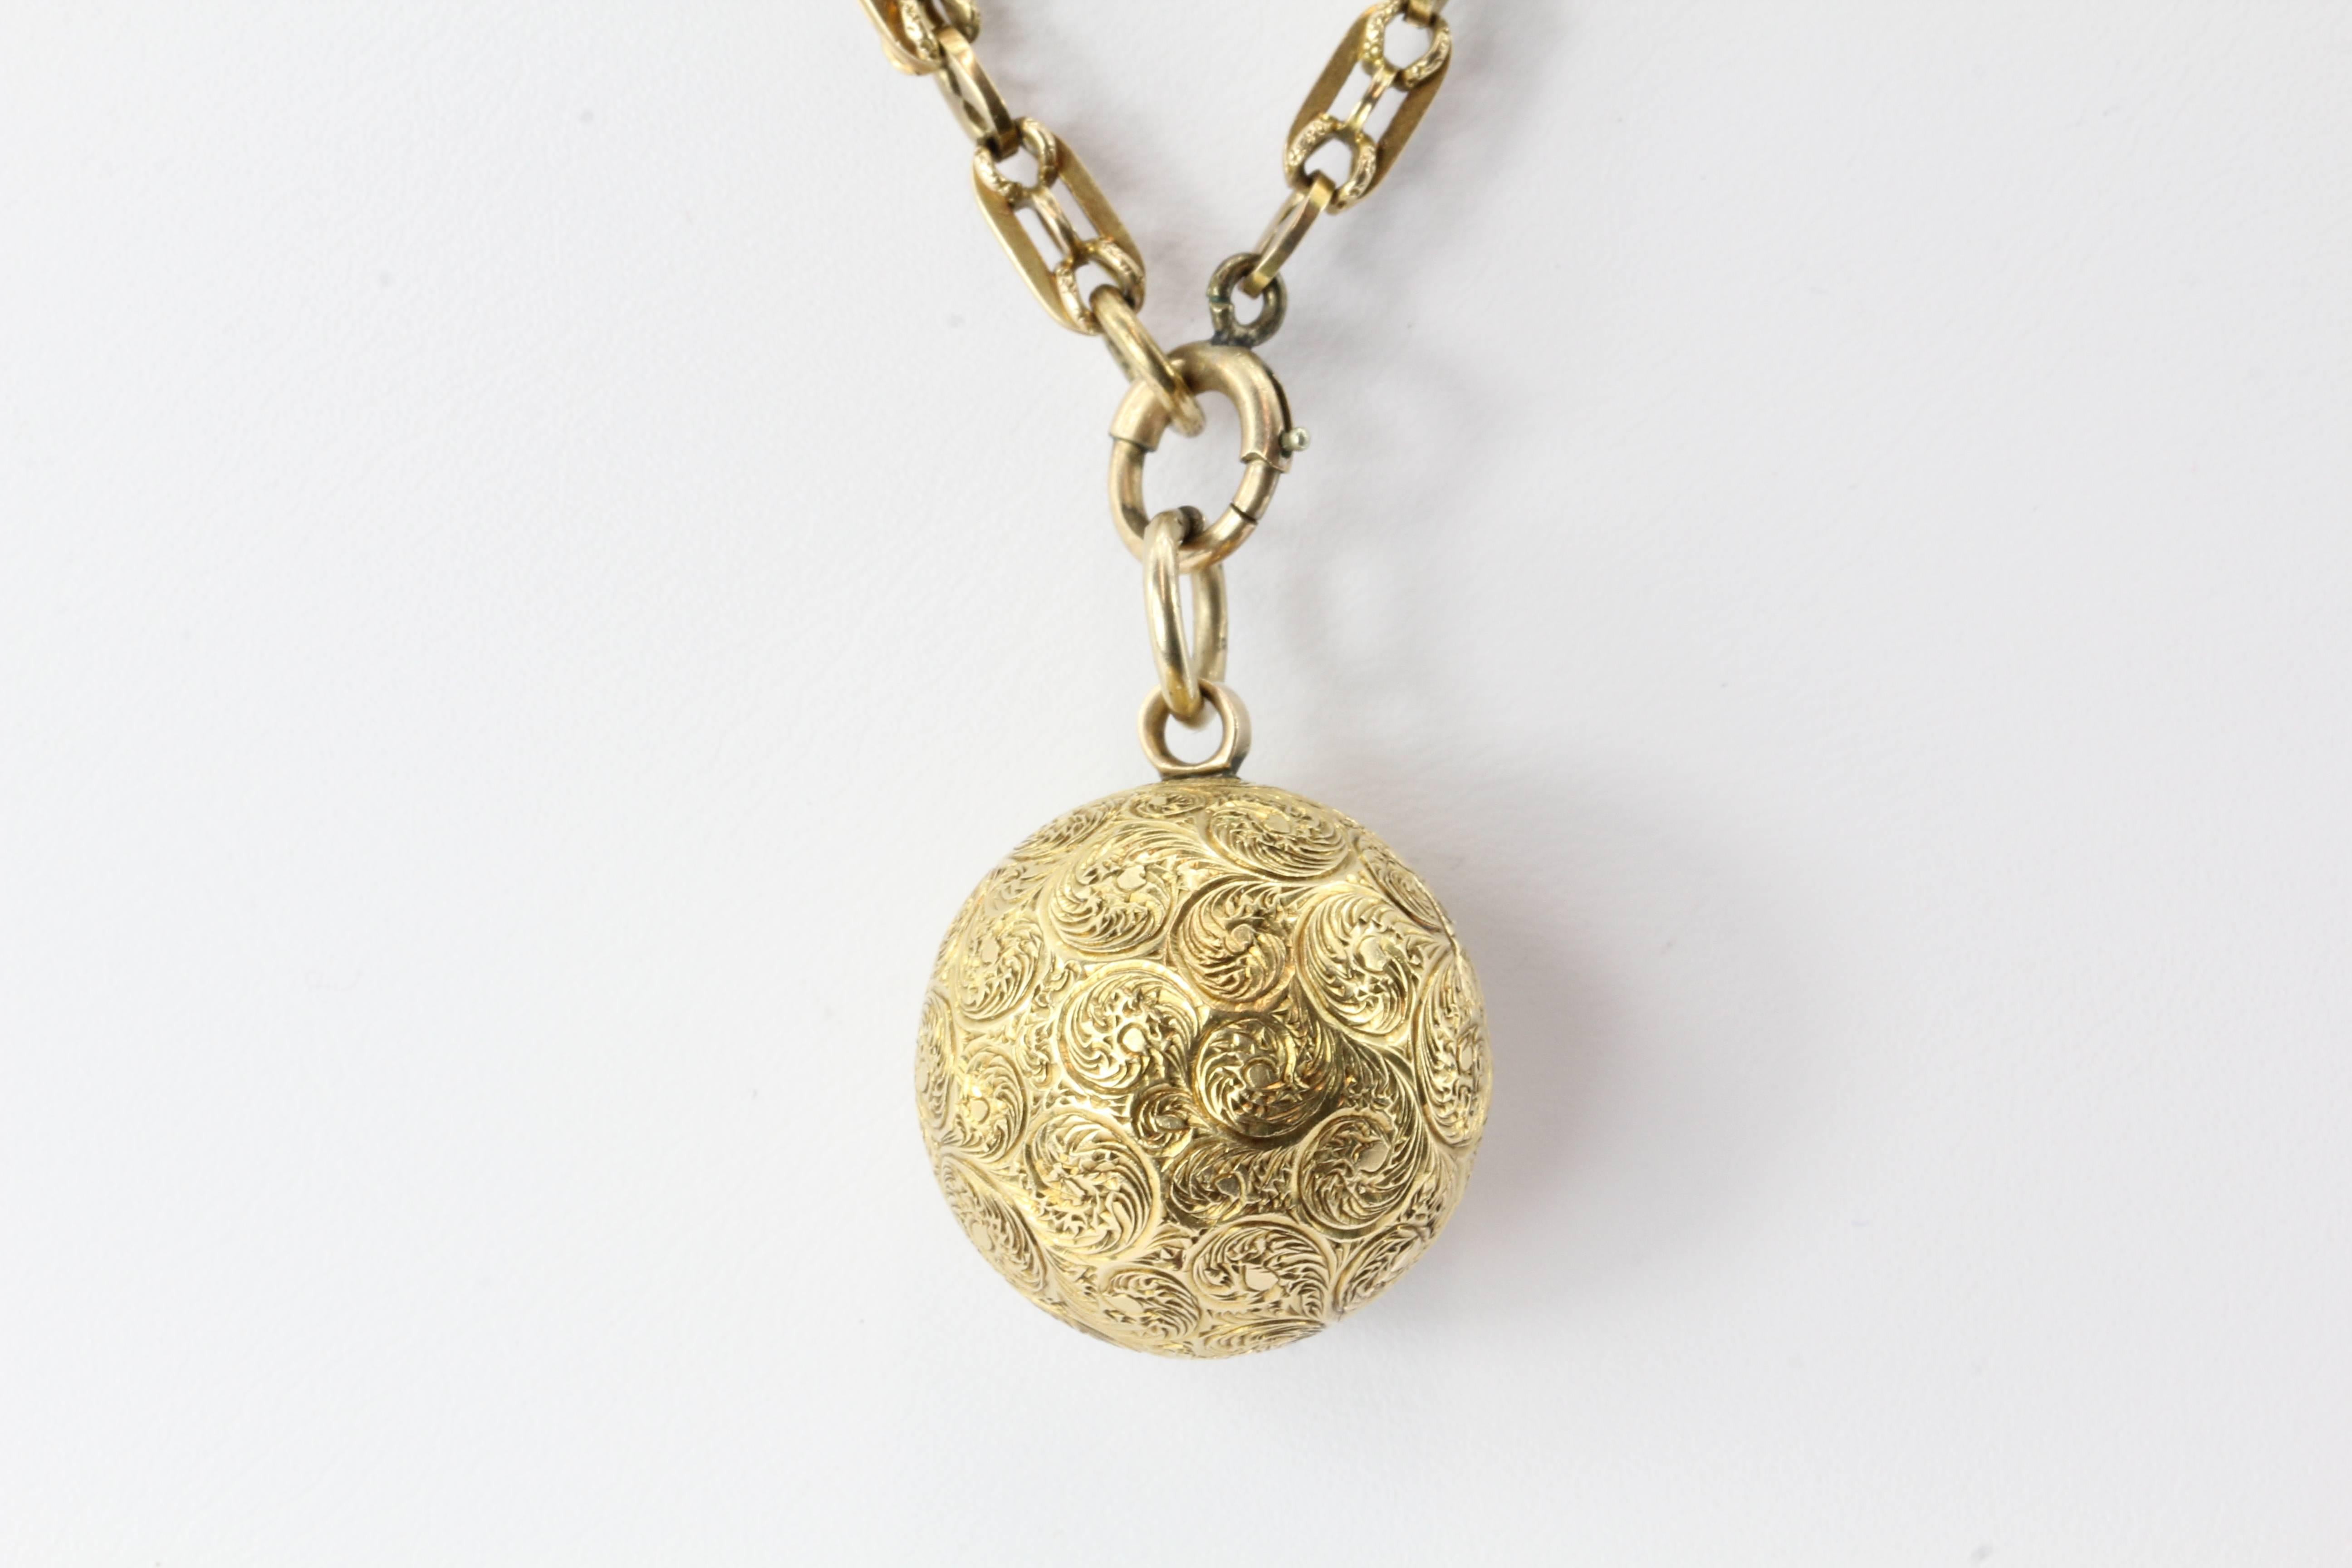 Victorian 18K Gold Ball Locket Pendant on 14K Gold Chain. The piece is in excellent estate condition and ready to wear. The ball locket pendant has a hand chased design on it and it is engraved "Carrie" on the outside. The inside is